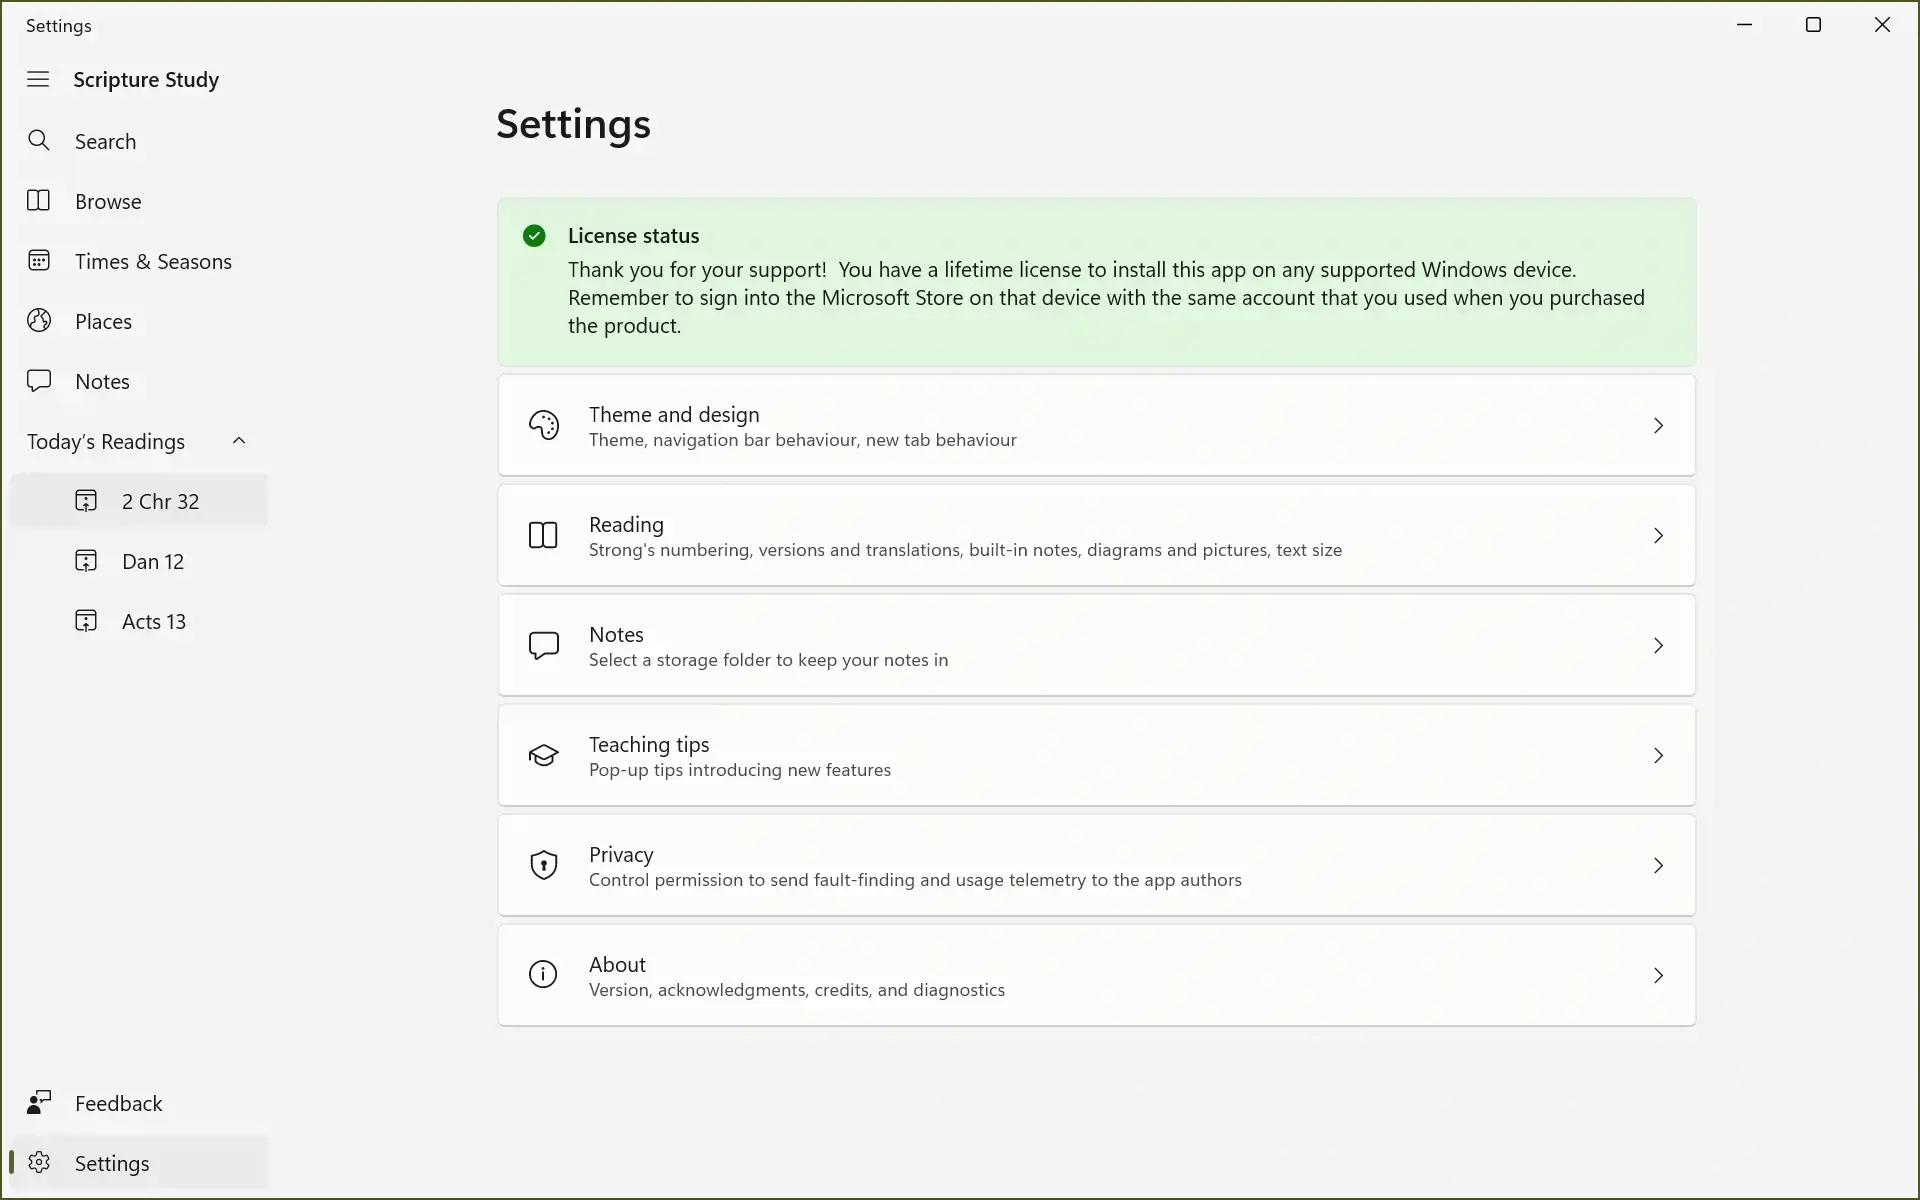 Screenshot showing the first Settings page in the app